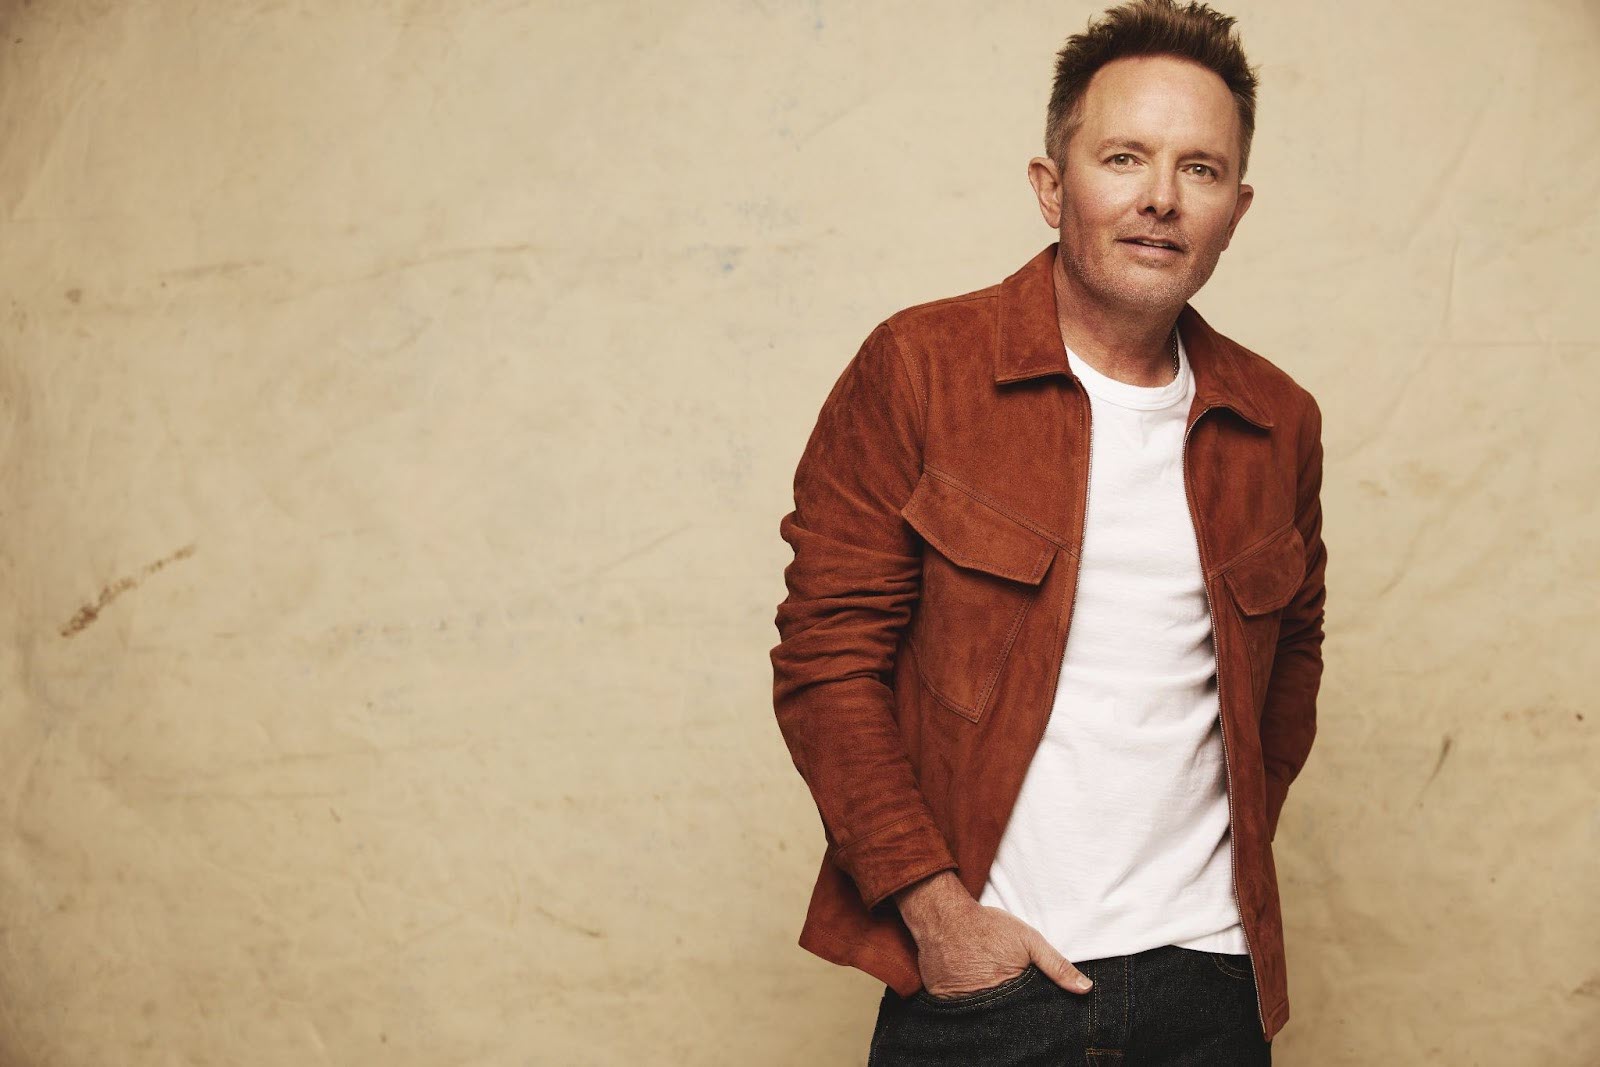 10 Best Chris Tomlin Songs of All Time [Video]